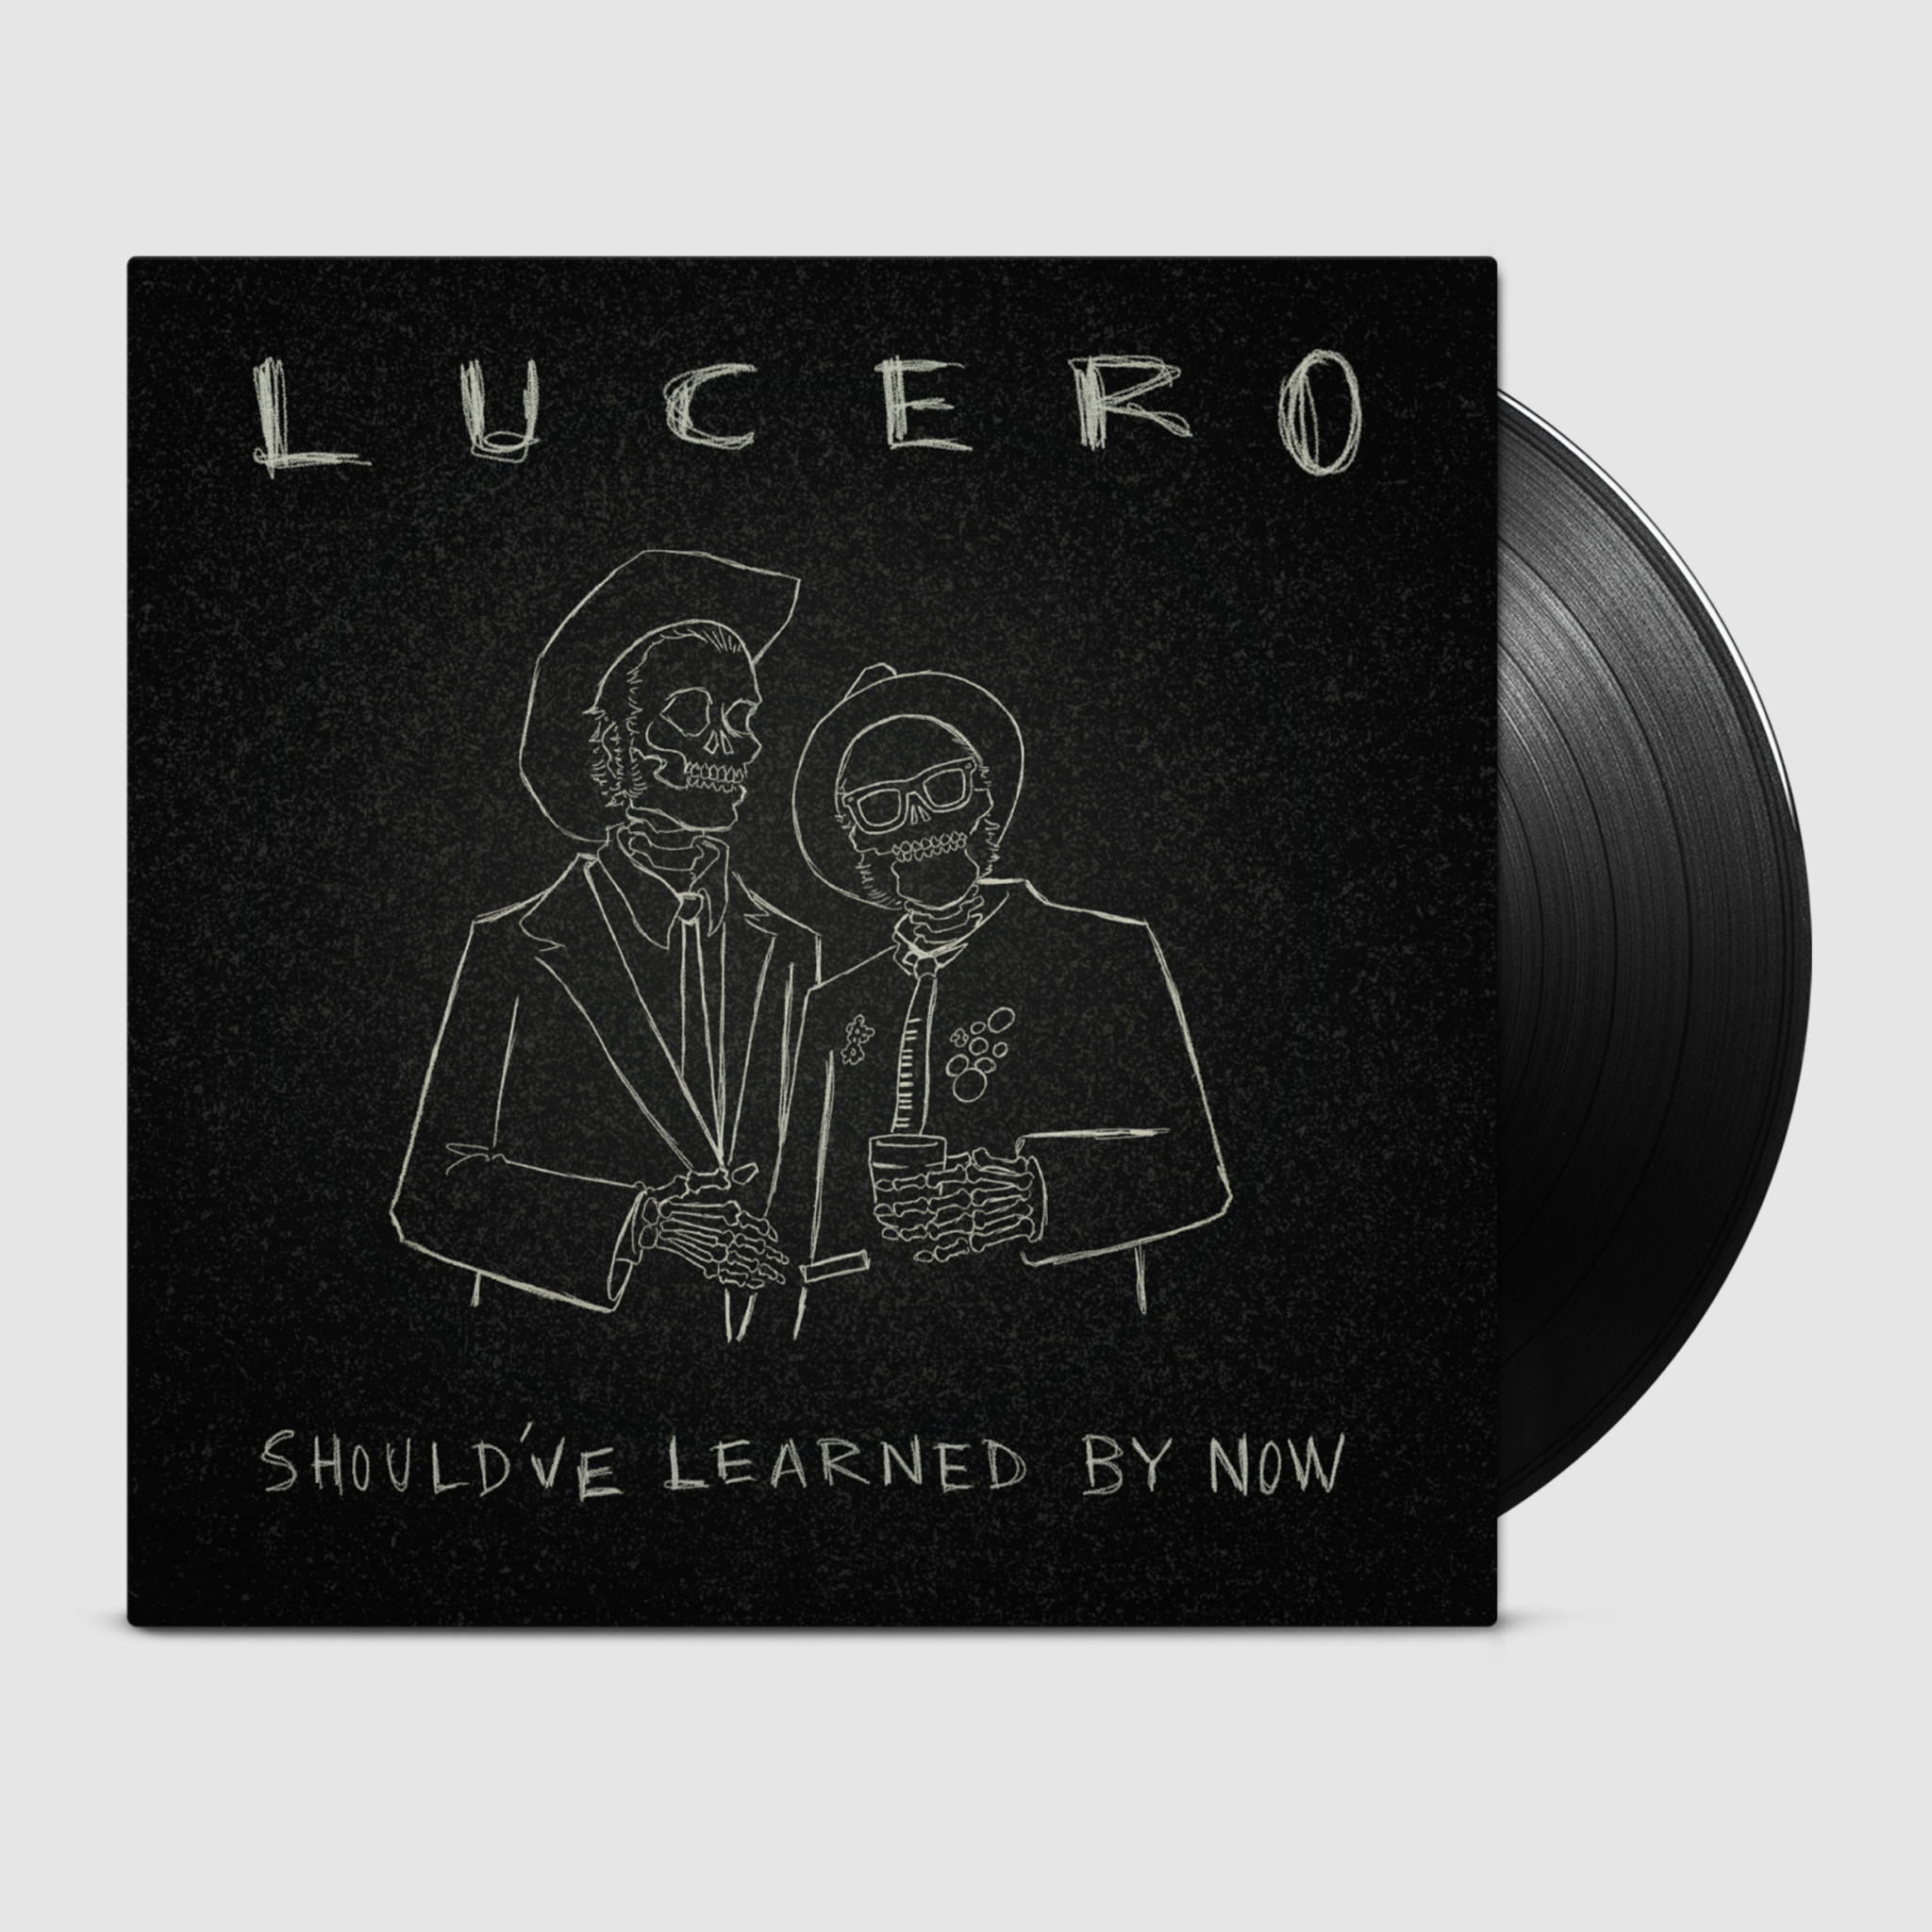 Lucero - Should've Learned By Now LP or CD